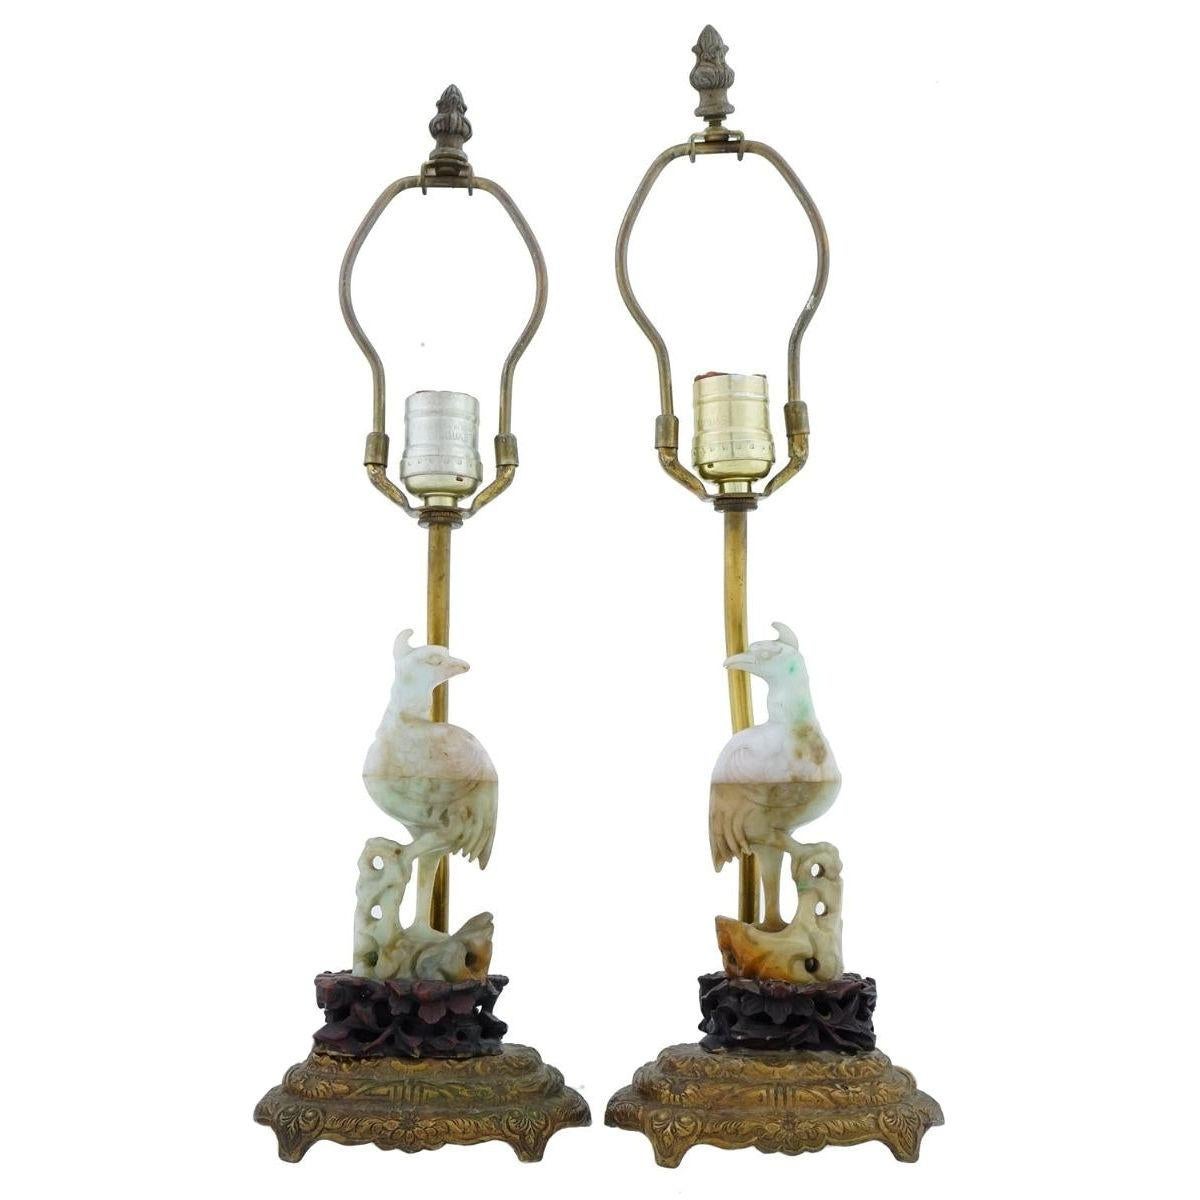 Pair of Chinese table lamps dating from the early 20th century featuring hand-carved jade figures of exotic standing birds mounted on carved rosewood bases and cast bronze stands.  With modern sockets and wiring, ready for use.